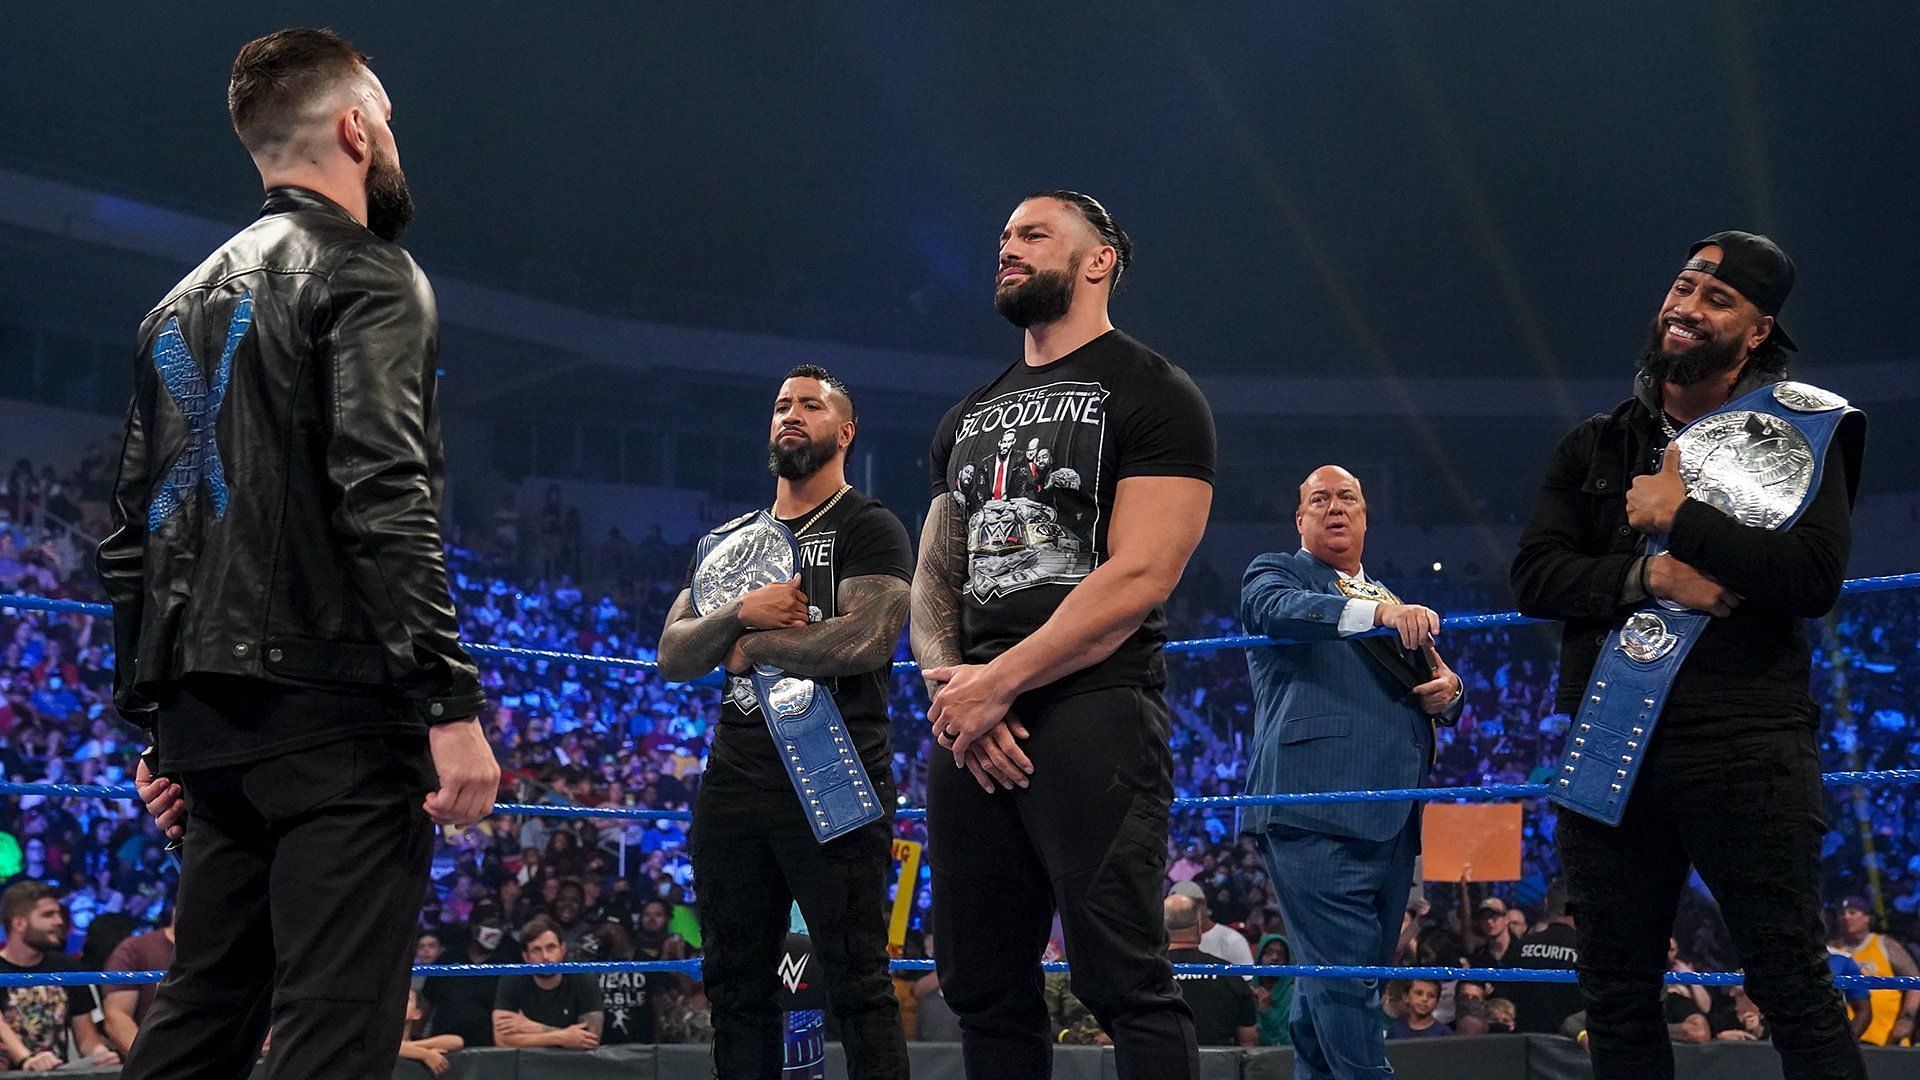 Finn Balor and The Bloodline!